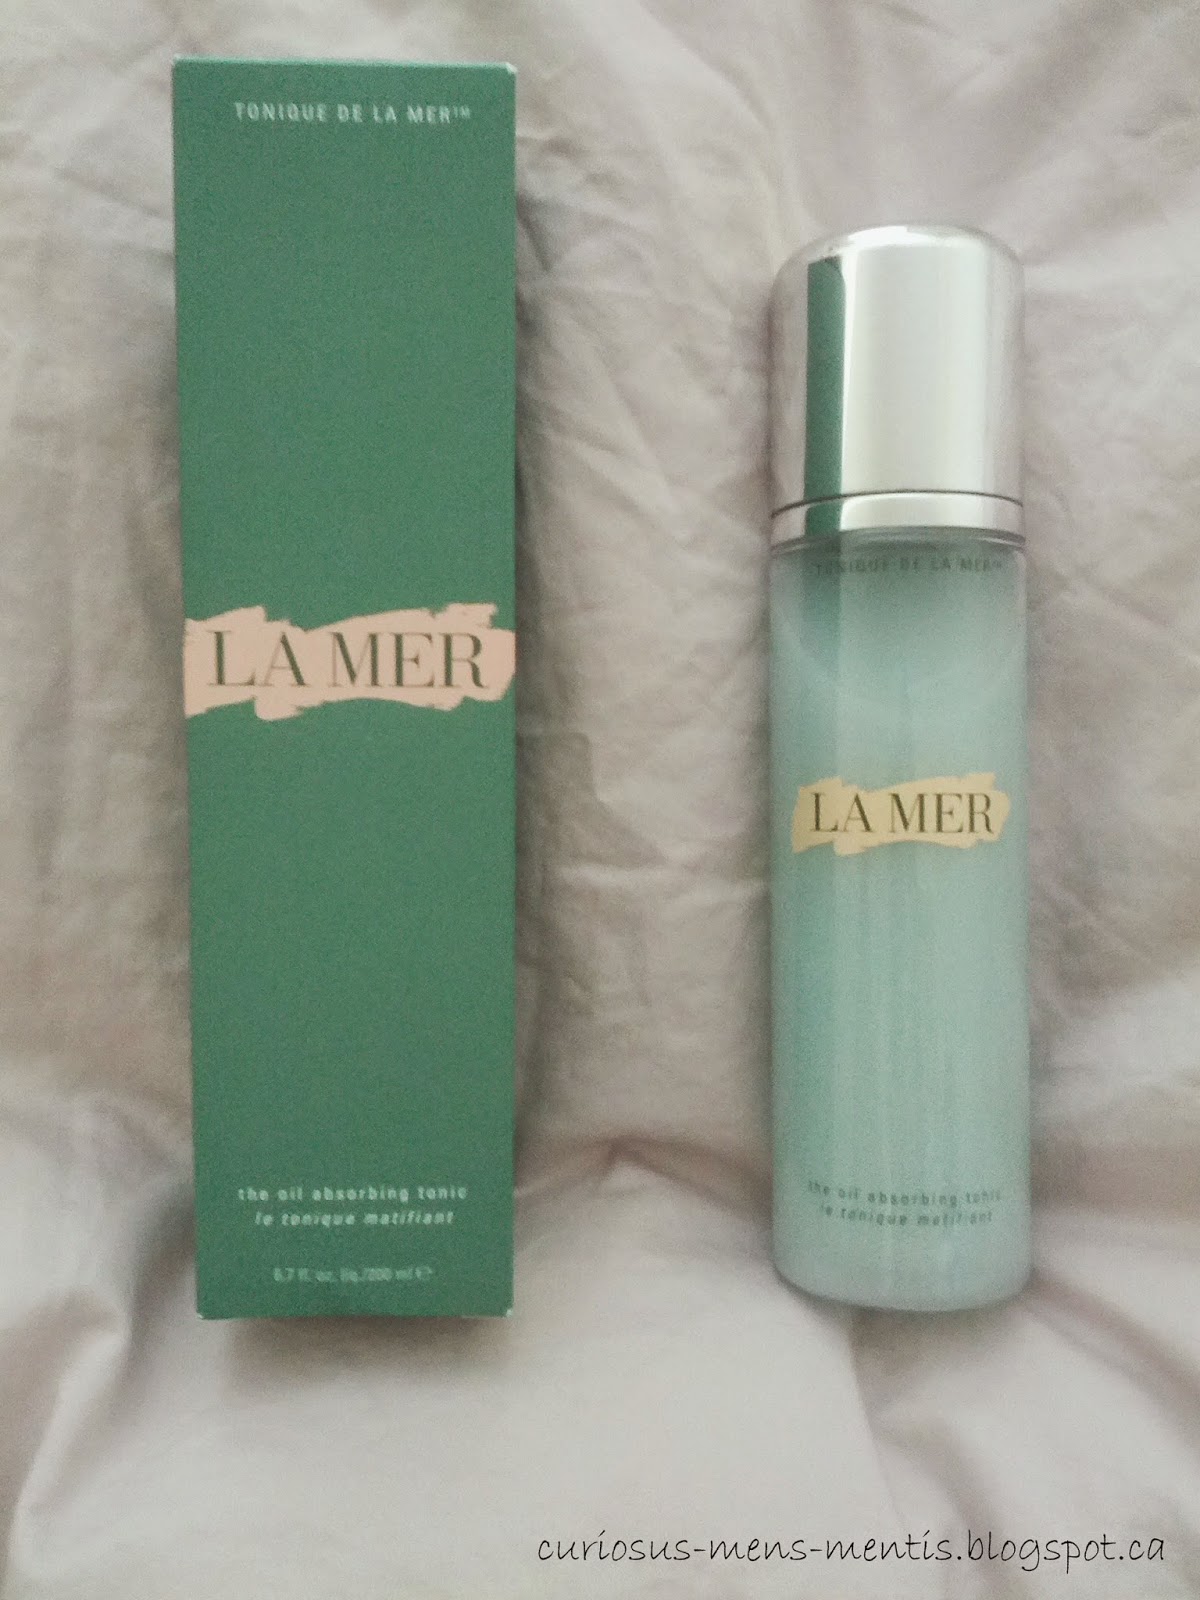 Seminary vride velfærd Curiosus Minds: Review: La Mer The Oil Absorbing Tonic